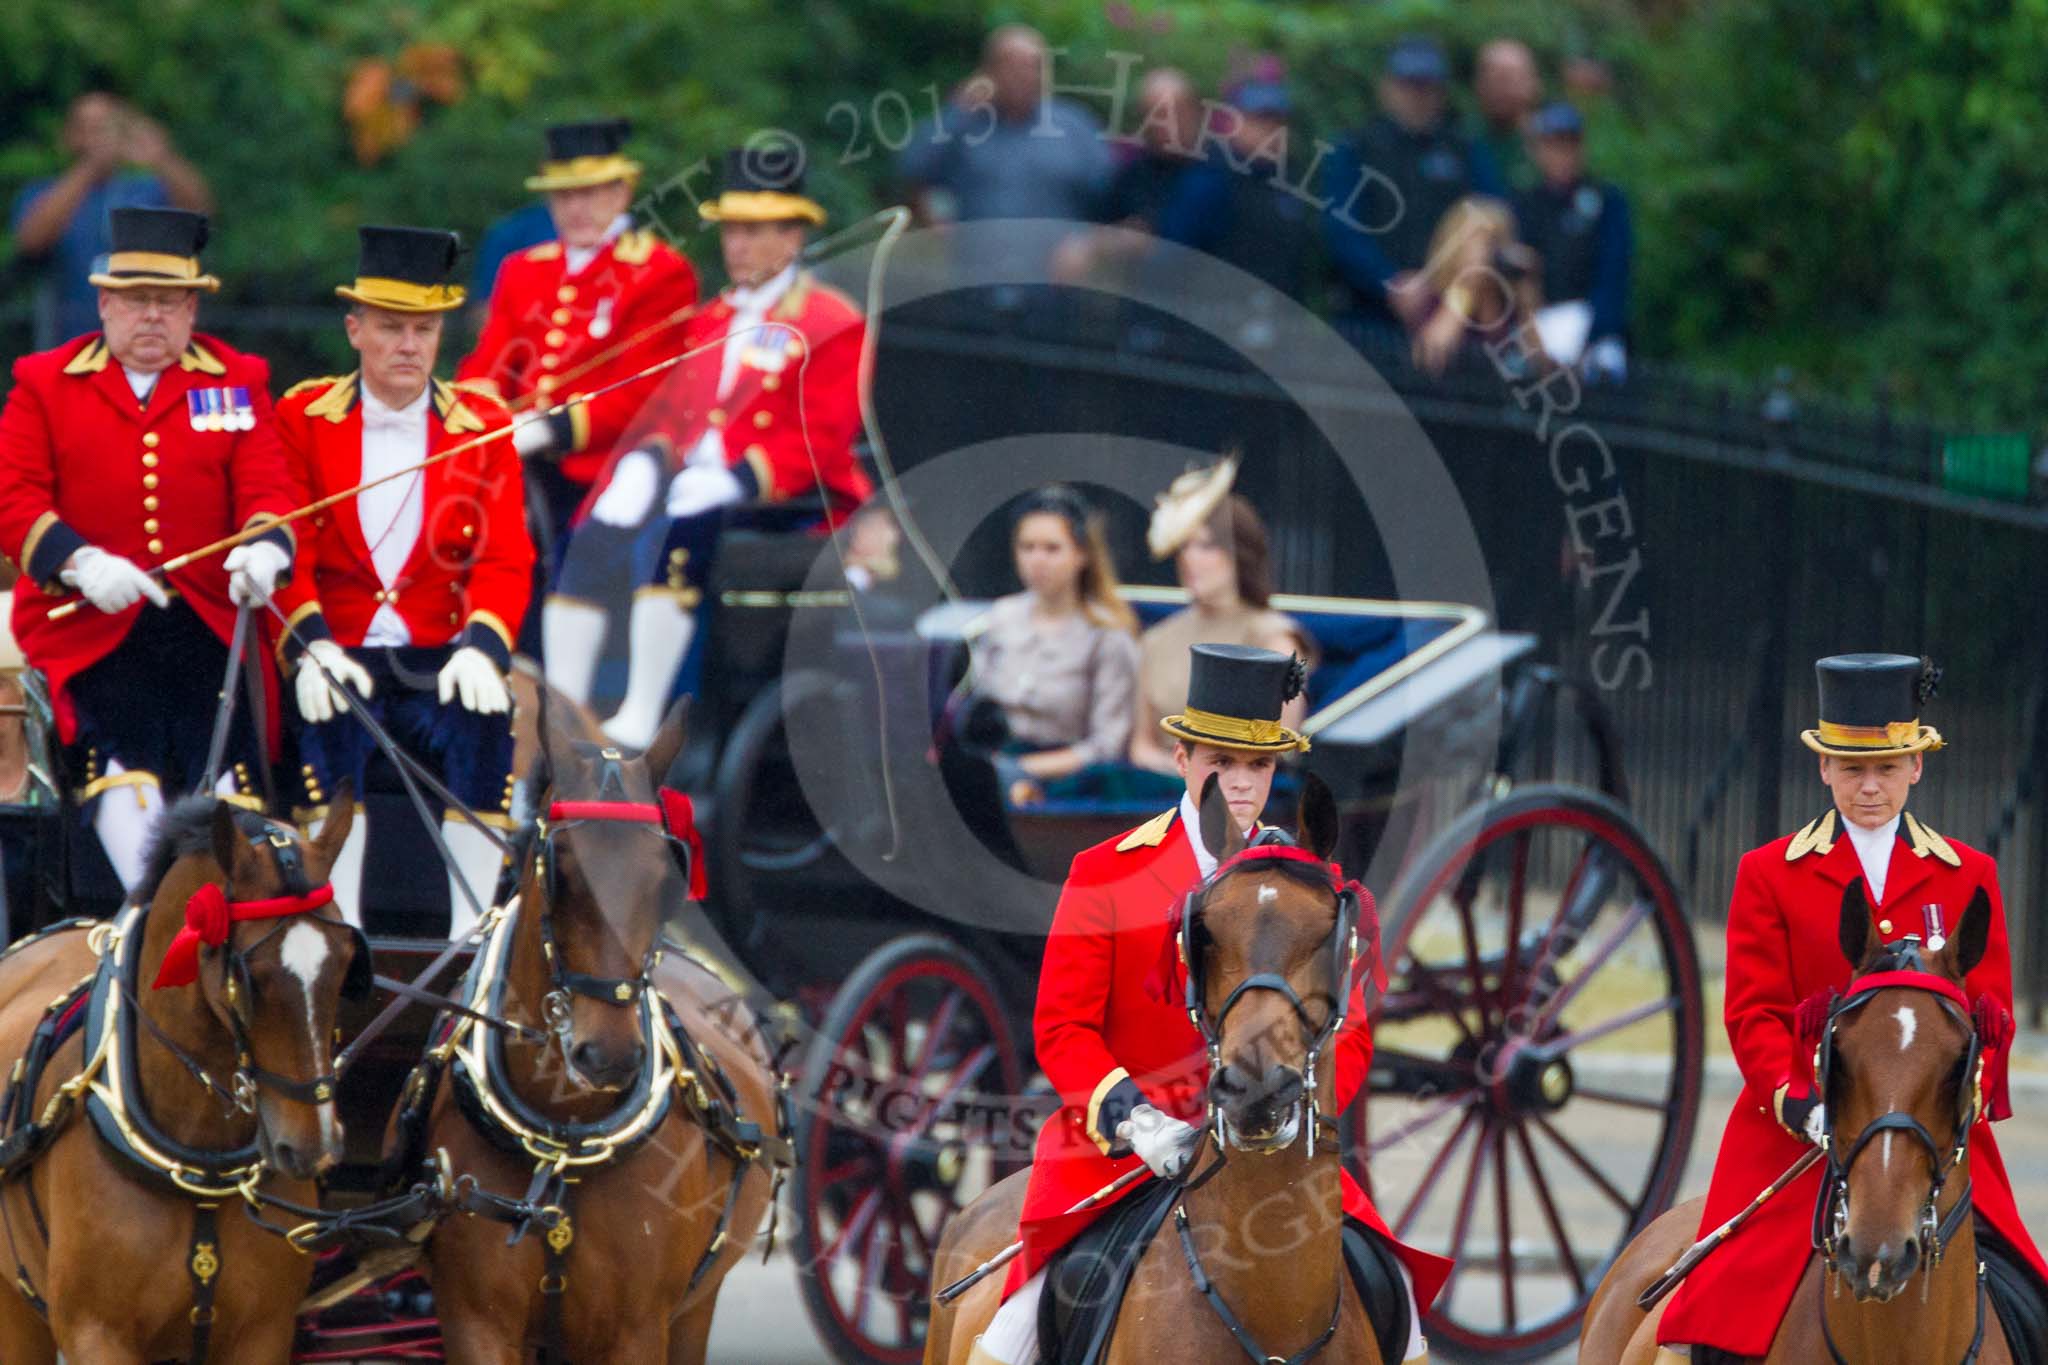 Trooping the Colour 2015. Image #183, 13 June 2015 10:50 Horse Guards Parade, London, UK